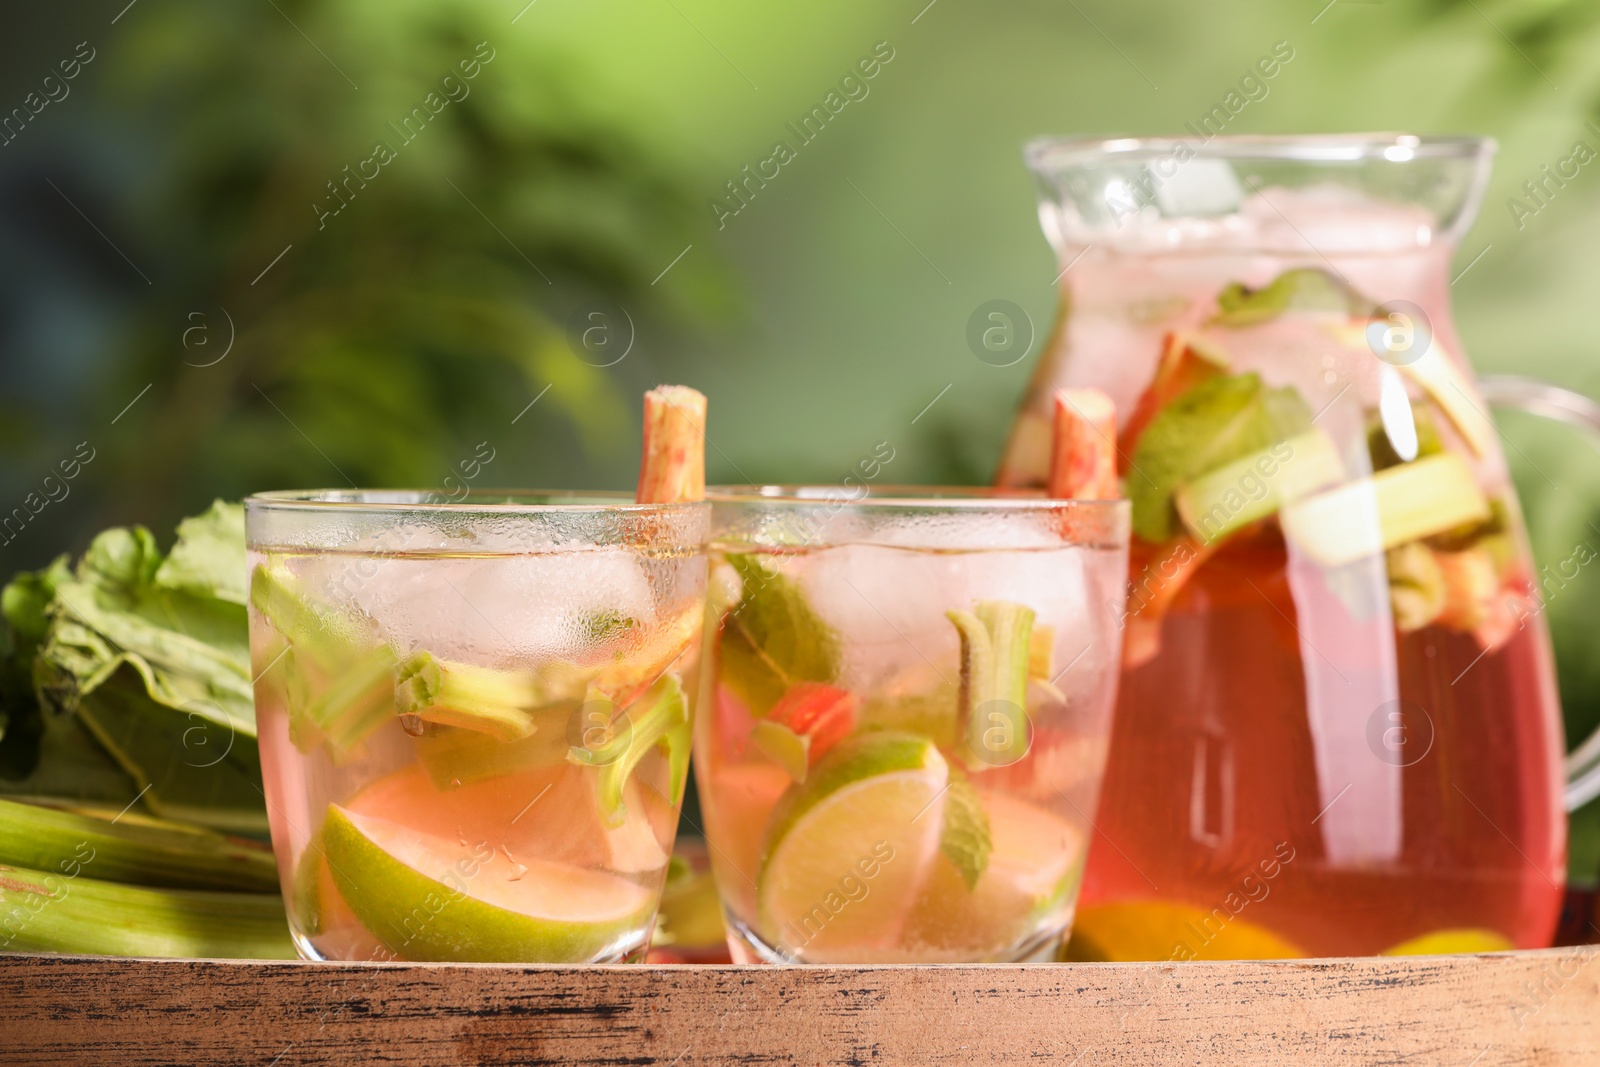 Photo of Glasses and jug of tasty rhubarb cocktail with citrus fruits on wooden board outdoors, closeup